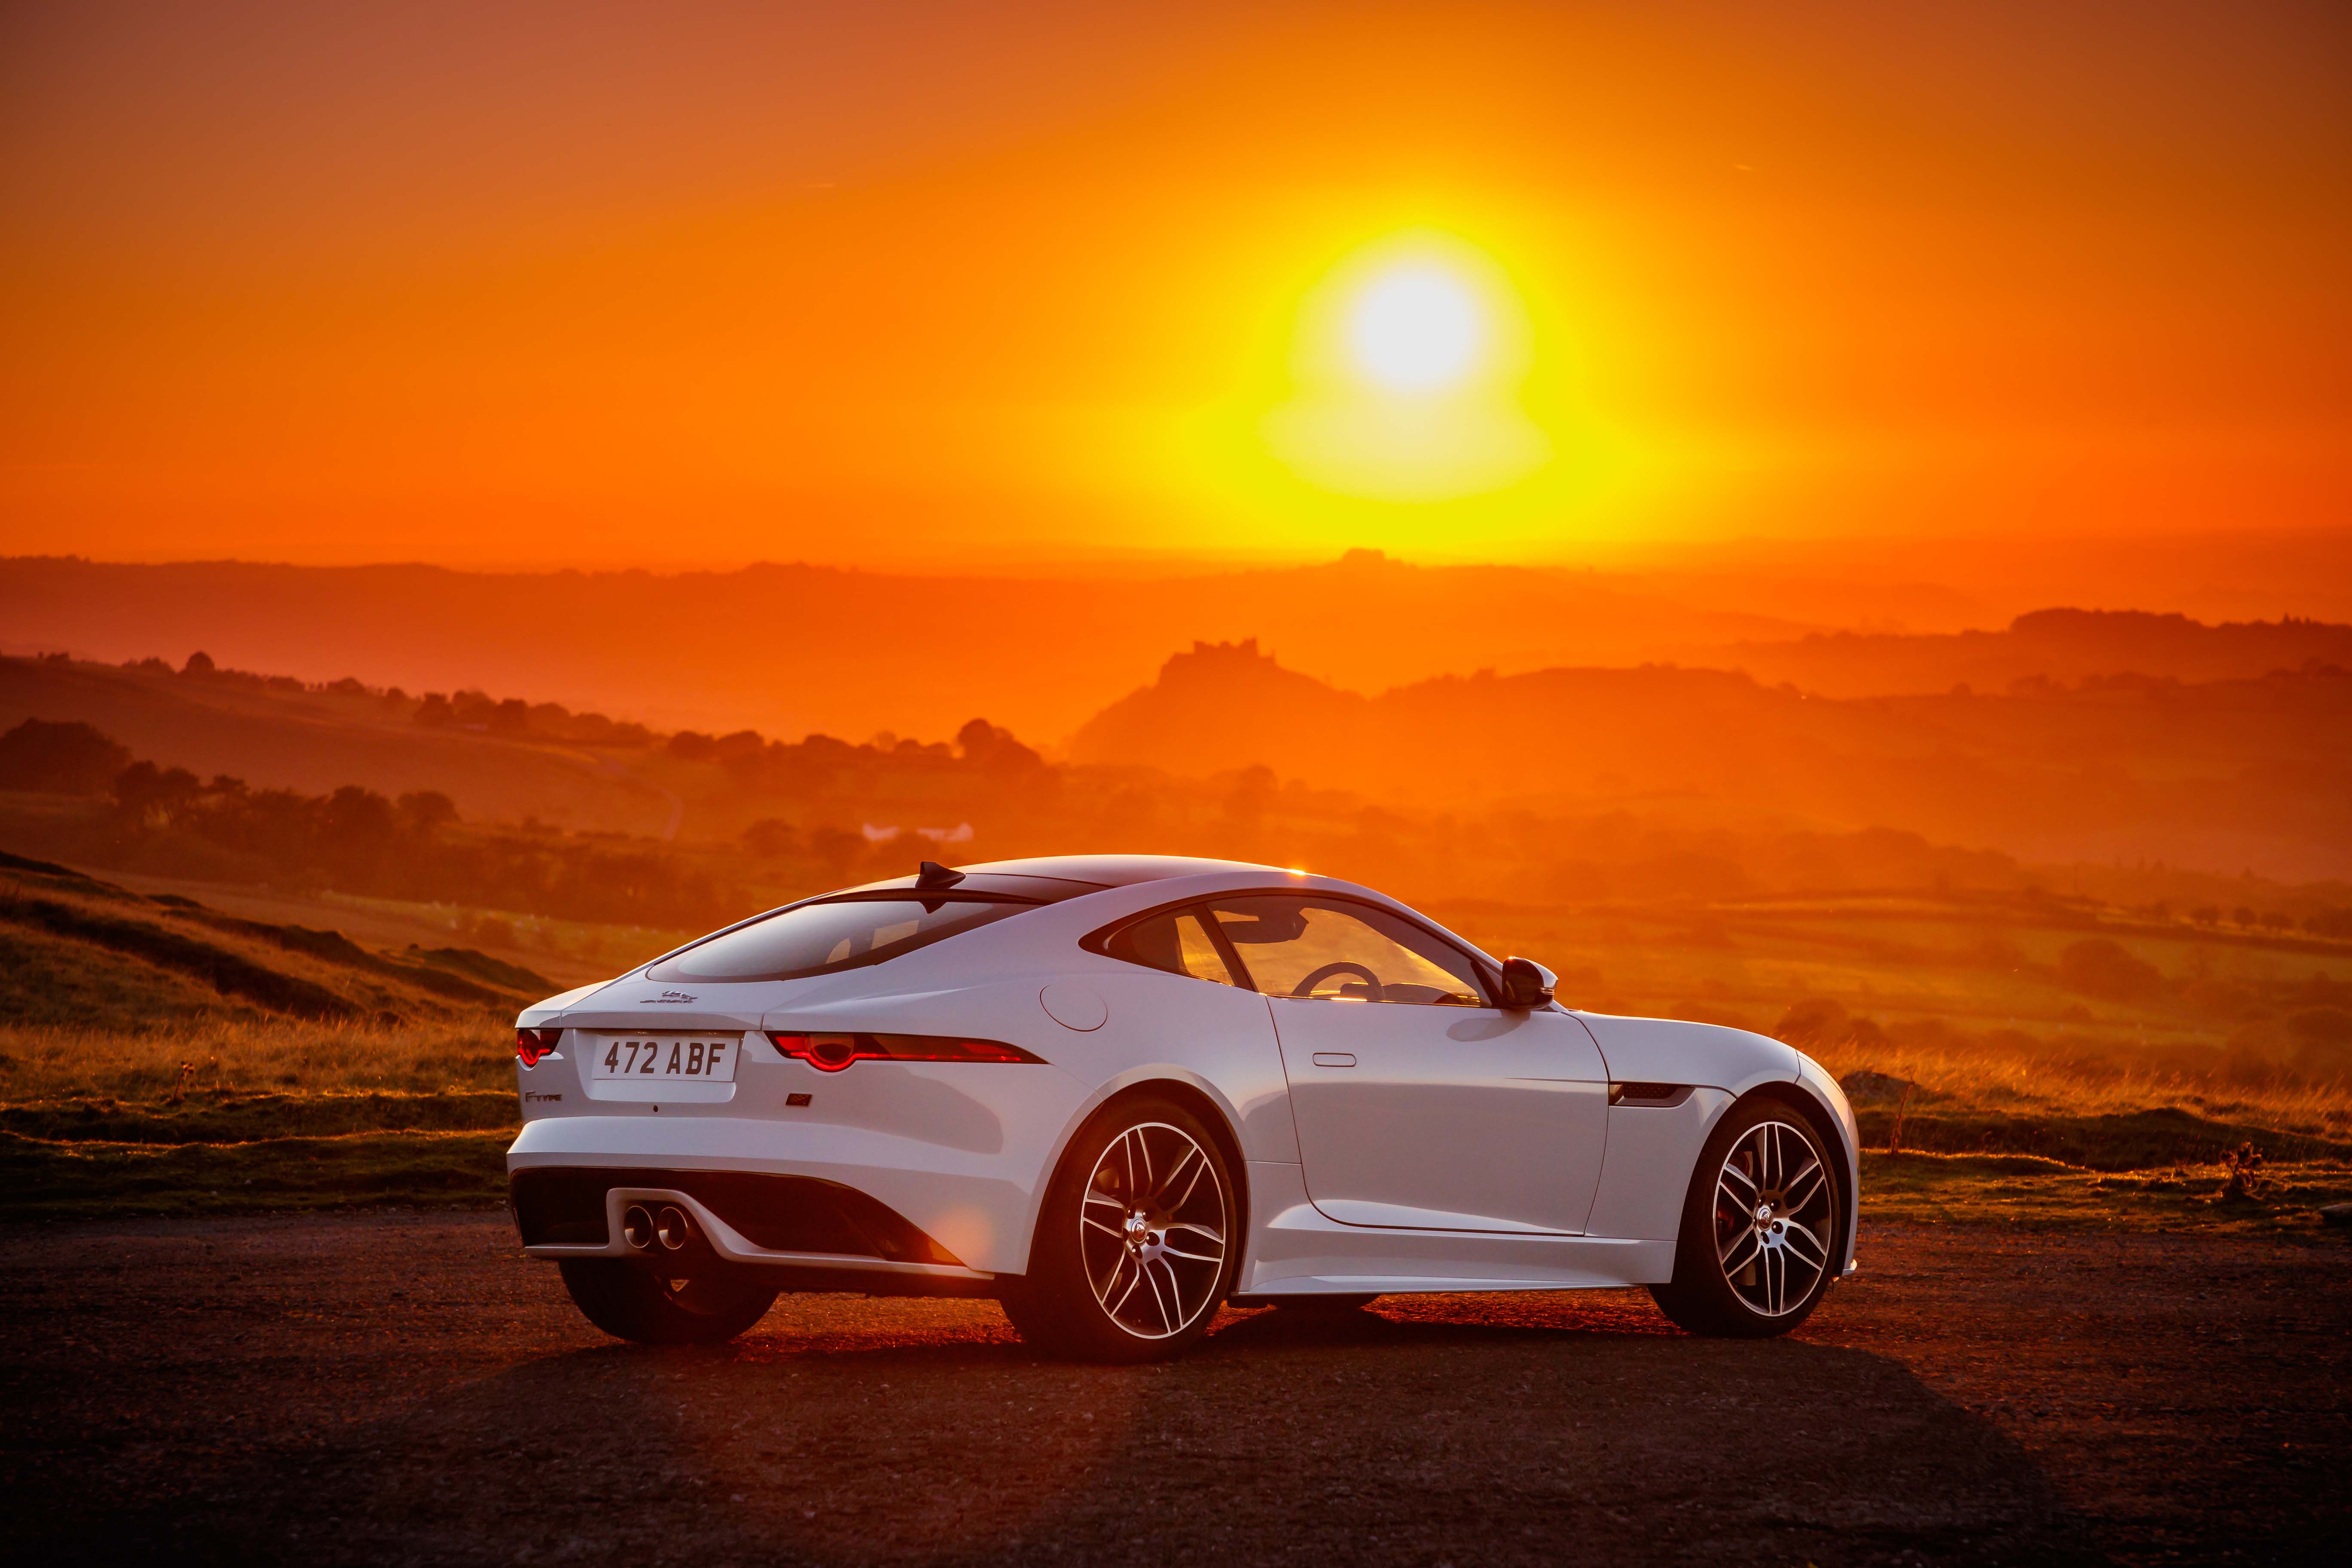 Jaguar F-Type Convertible hd specifications